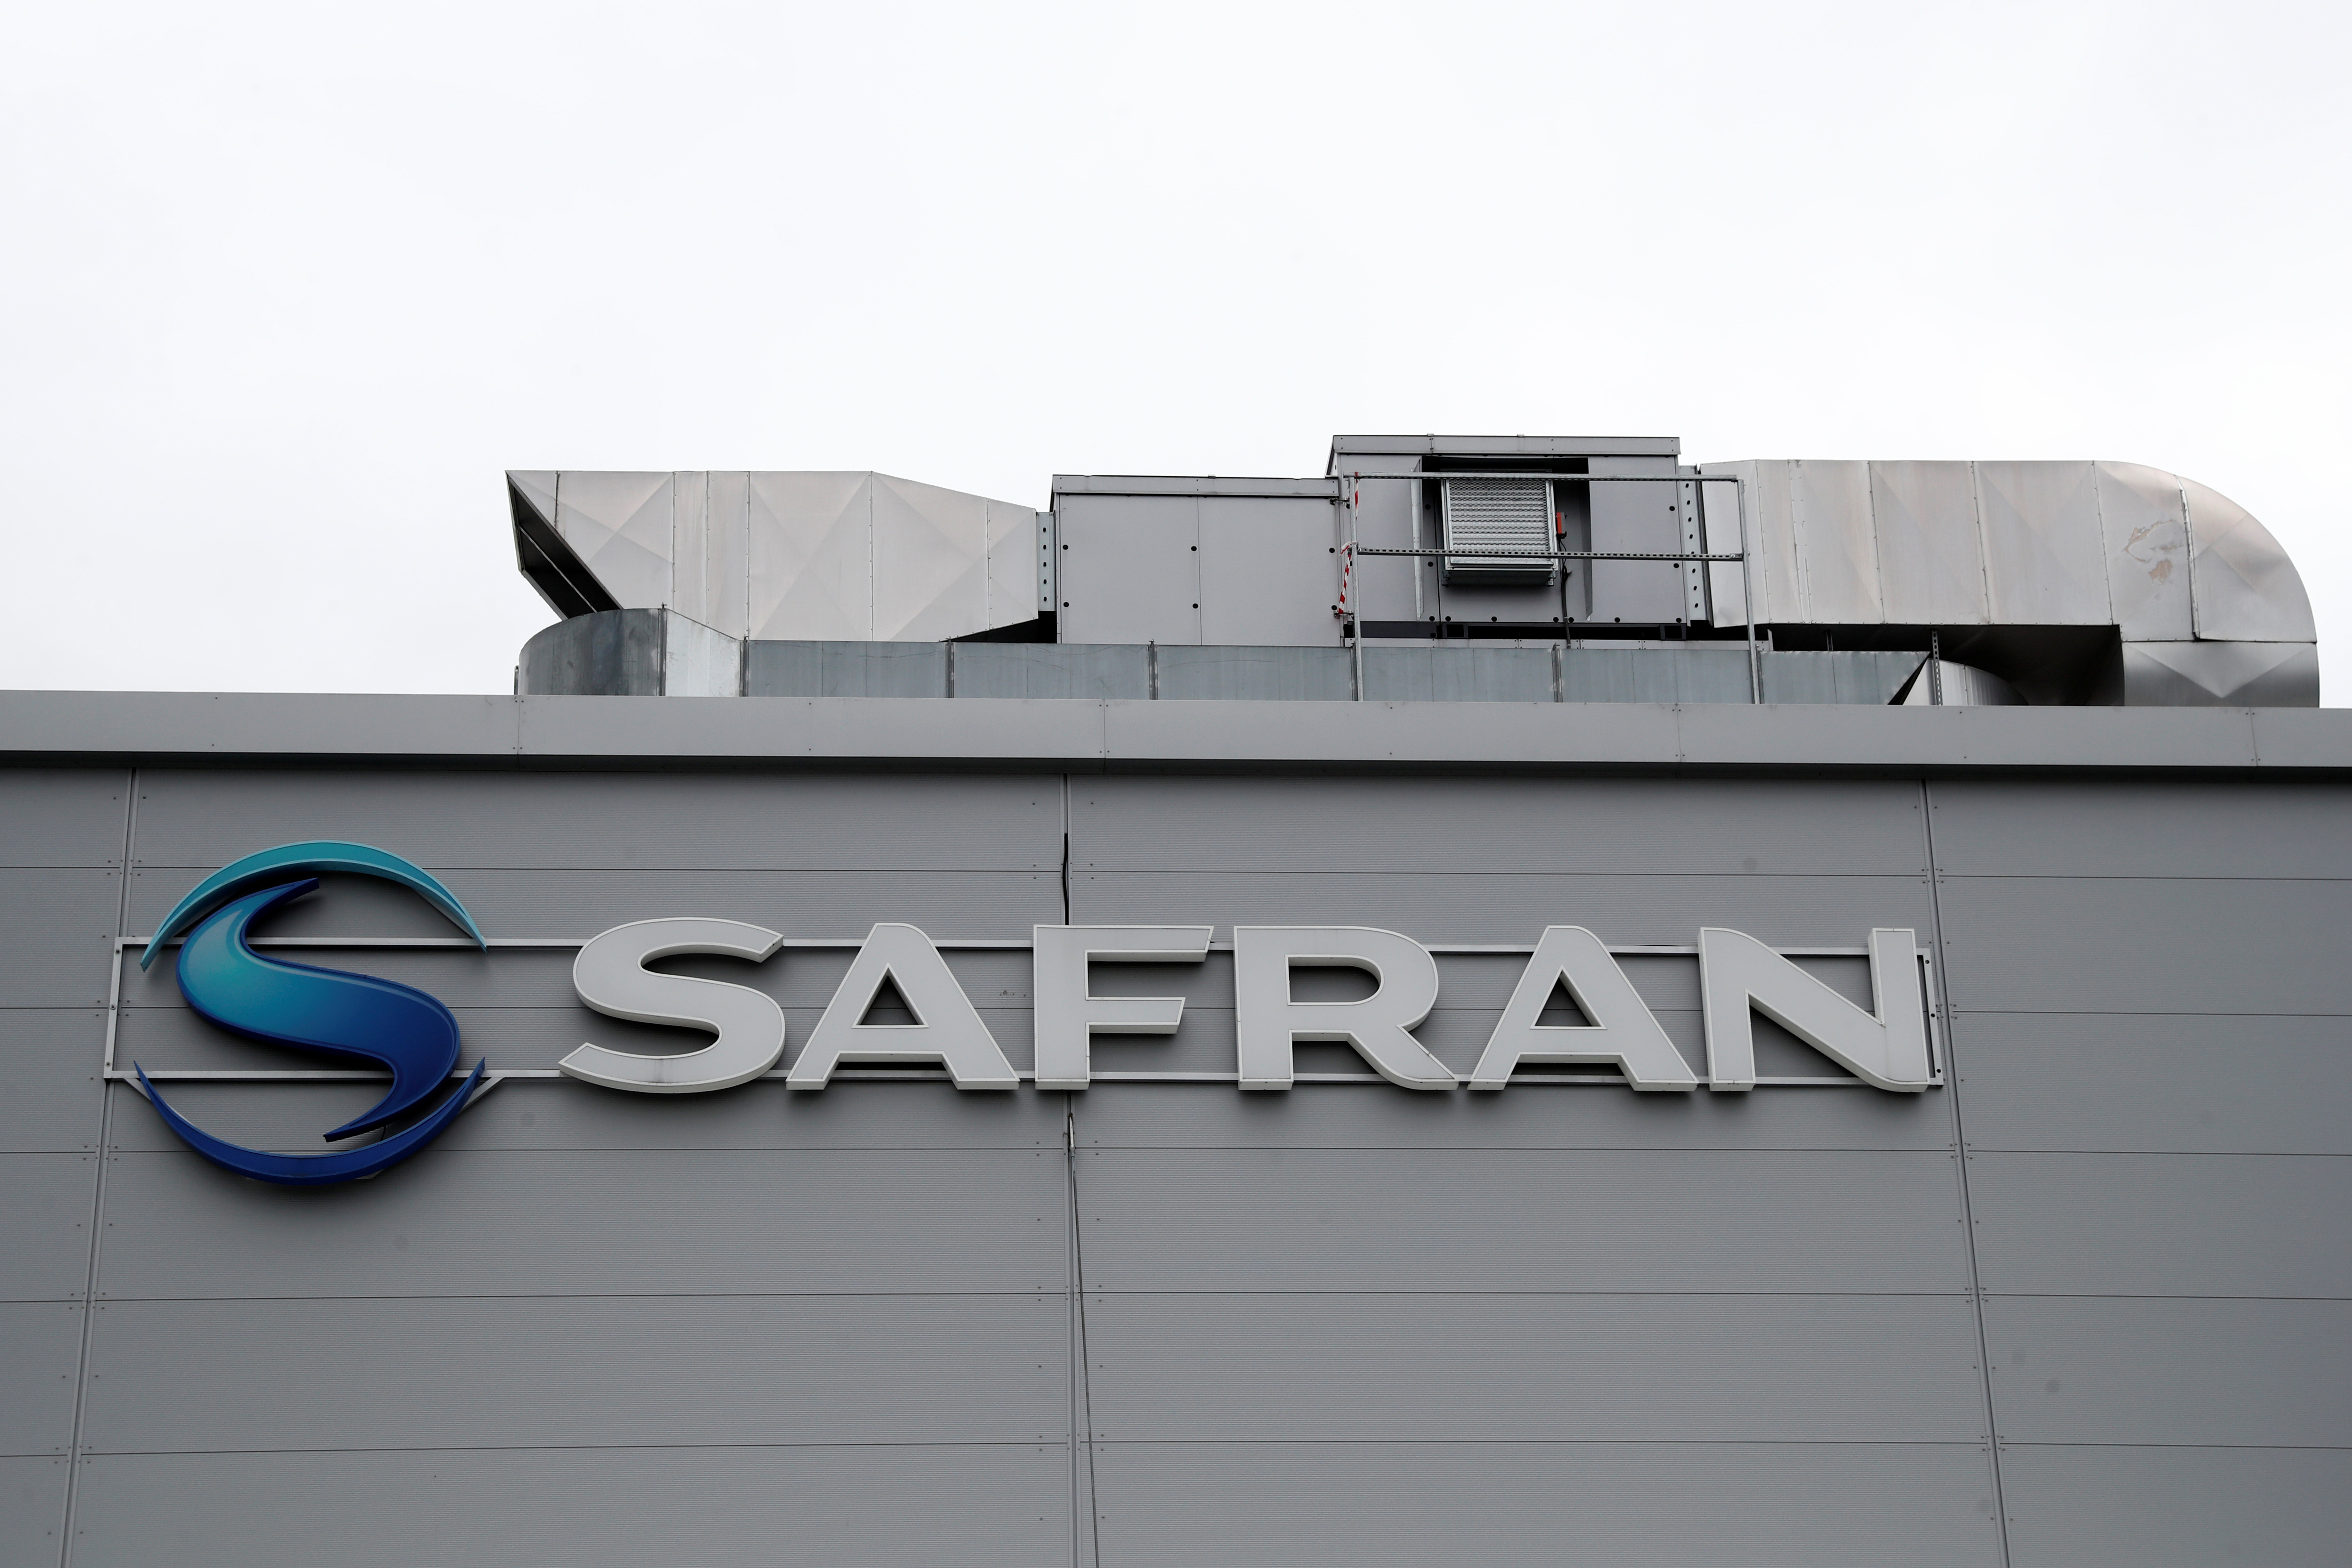 Safran warns against over-promising as aerospace supply remains tight